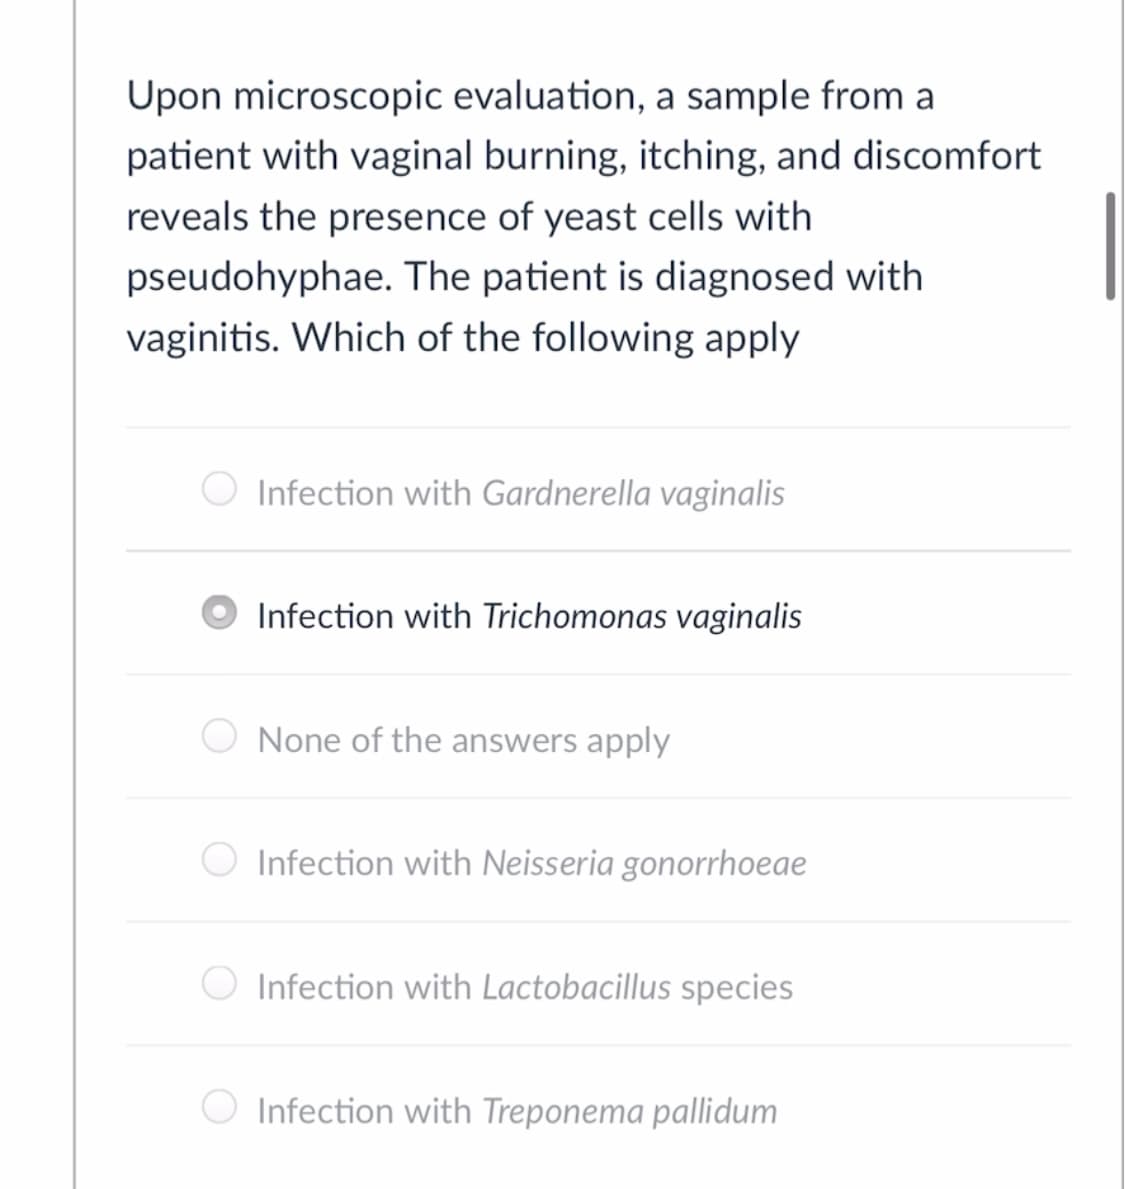 Upon microscopic evaluation, a sample from a
patient with vaginal burning, itching, and discomfort
reveals the presence of yeast cells with
pseudohyphae. The patient is diagnosed with
vaginitis. Which of the following apply
Infection with Gardnerella vaginalis
Infection with Trichomonas vaginalis
None of the answers apply
Infection with Neisseria gonorrhoeae
Infection with Lactobacillus species
O Infection with Treponema pallidum
